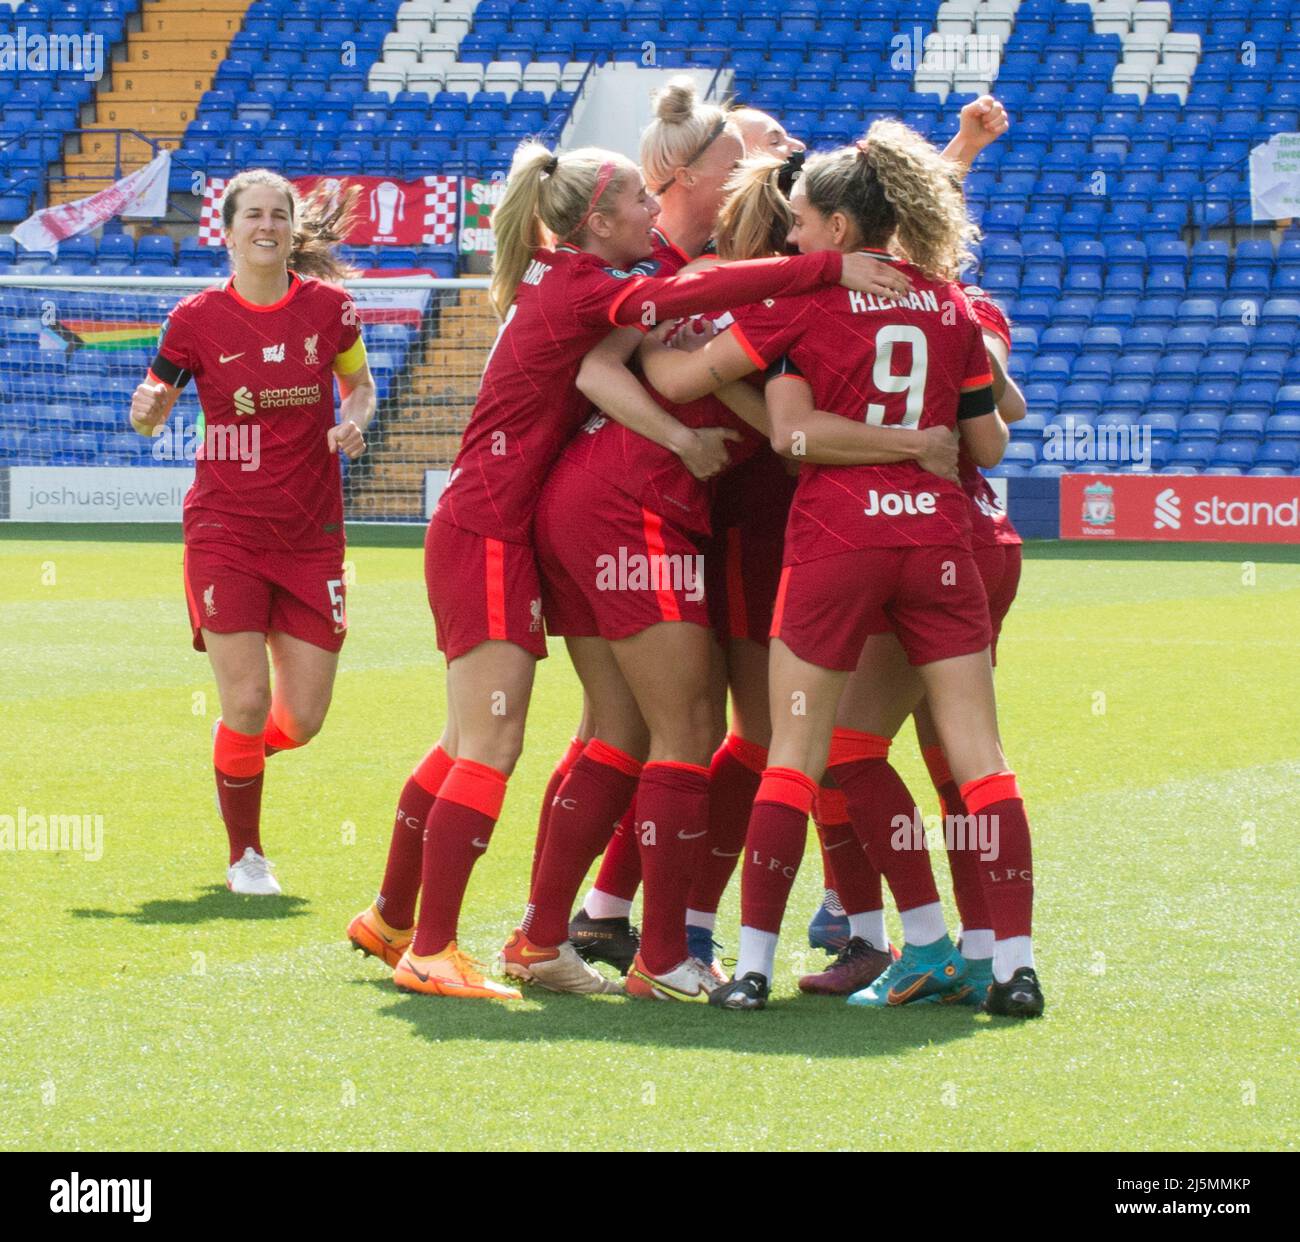 Birkenhead, UK. 24th Apr, 2022. Liverpool players celebrate a goal during the Womens Championship football match between Liverpool and Sheffield United at Prenton Park in Birkenhead, England. Terry Scott/SPP Credit: SPP Sport Press Photo. /Alamy Live News Stock Photo